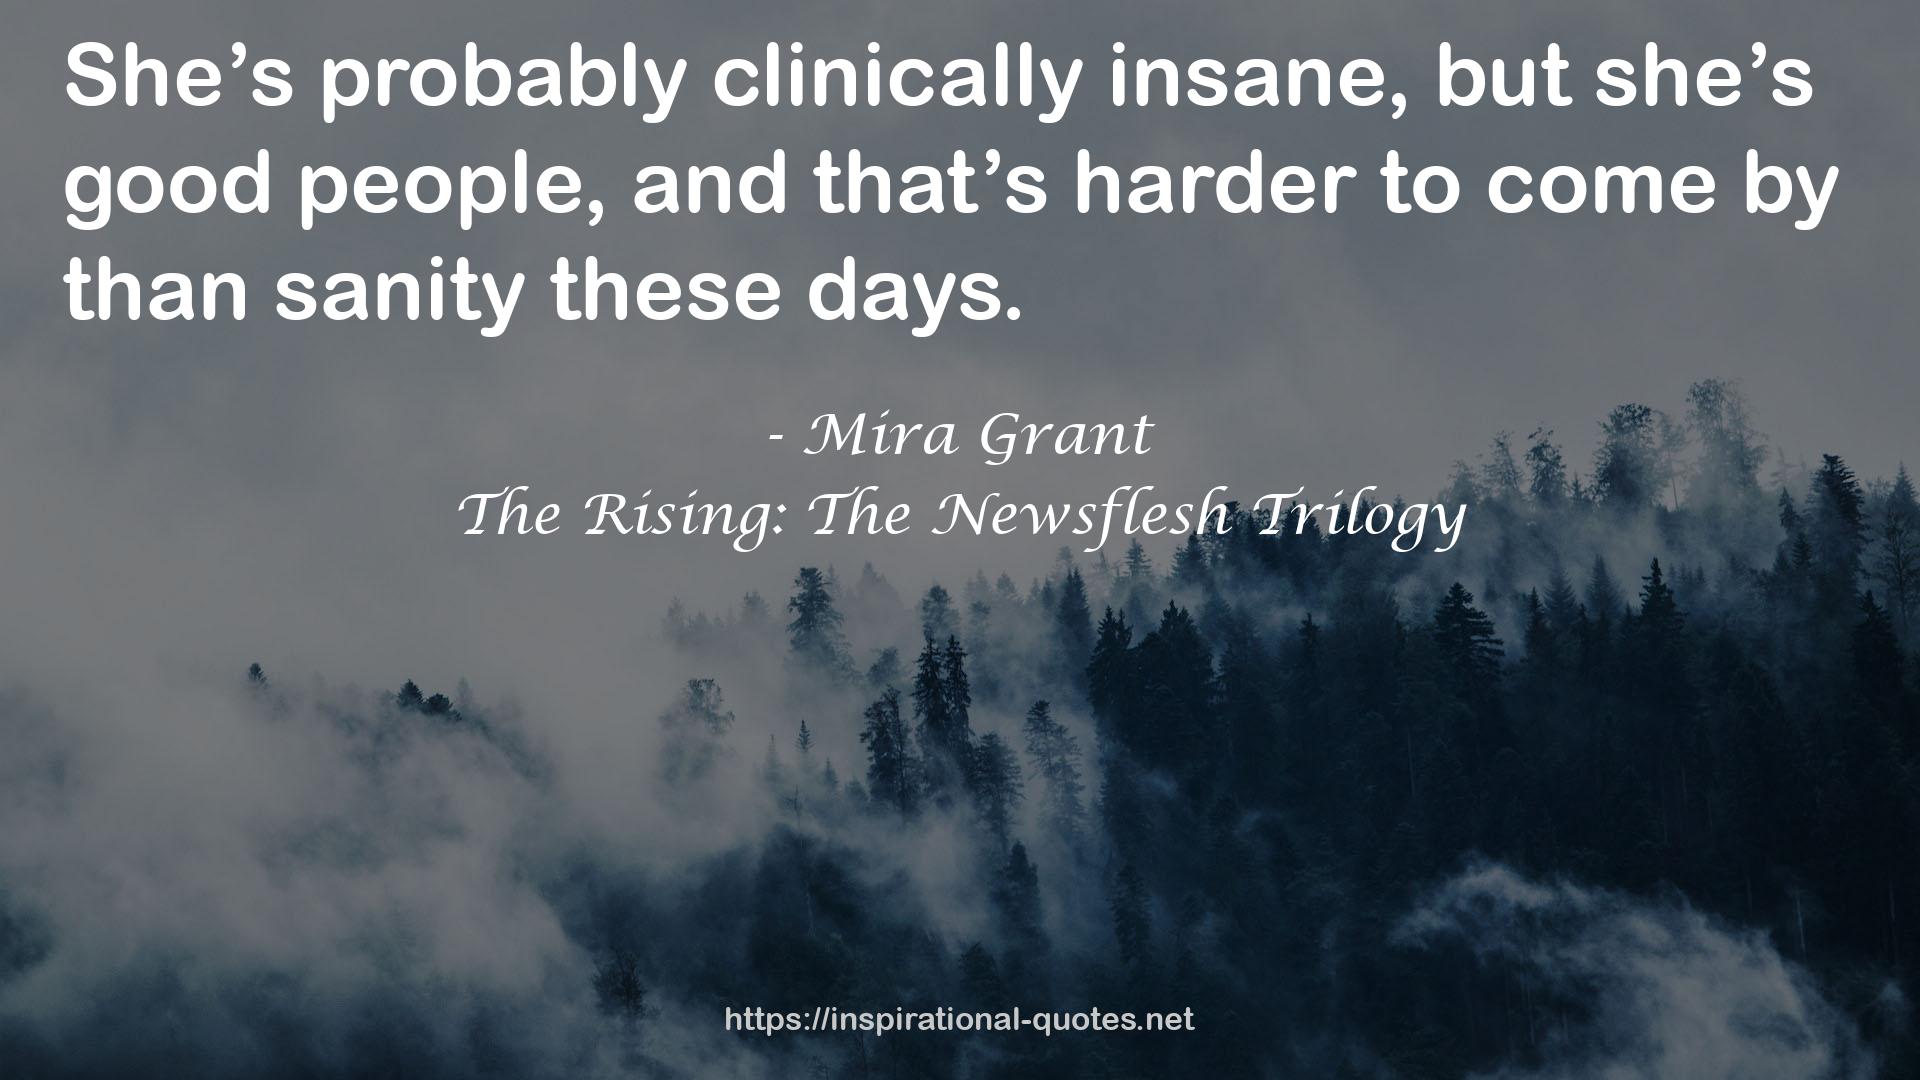 The Rising: The Newsflesh Trilogy QUOTES